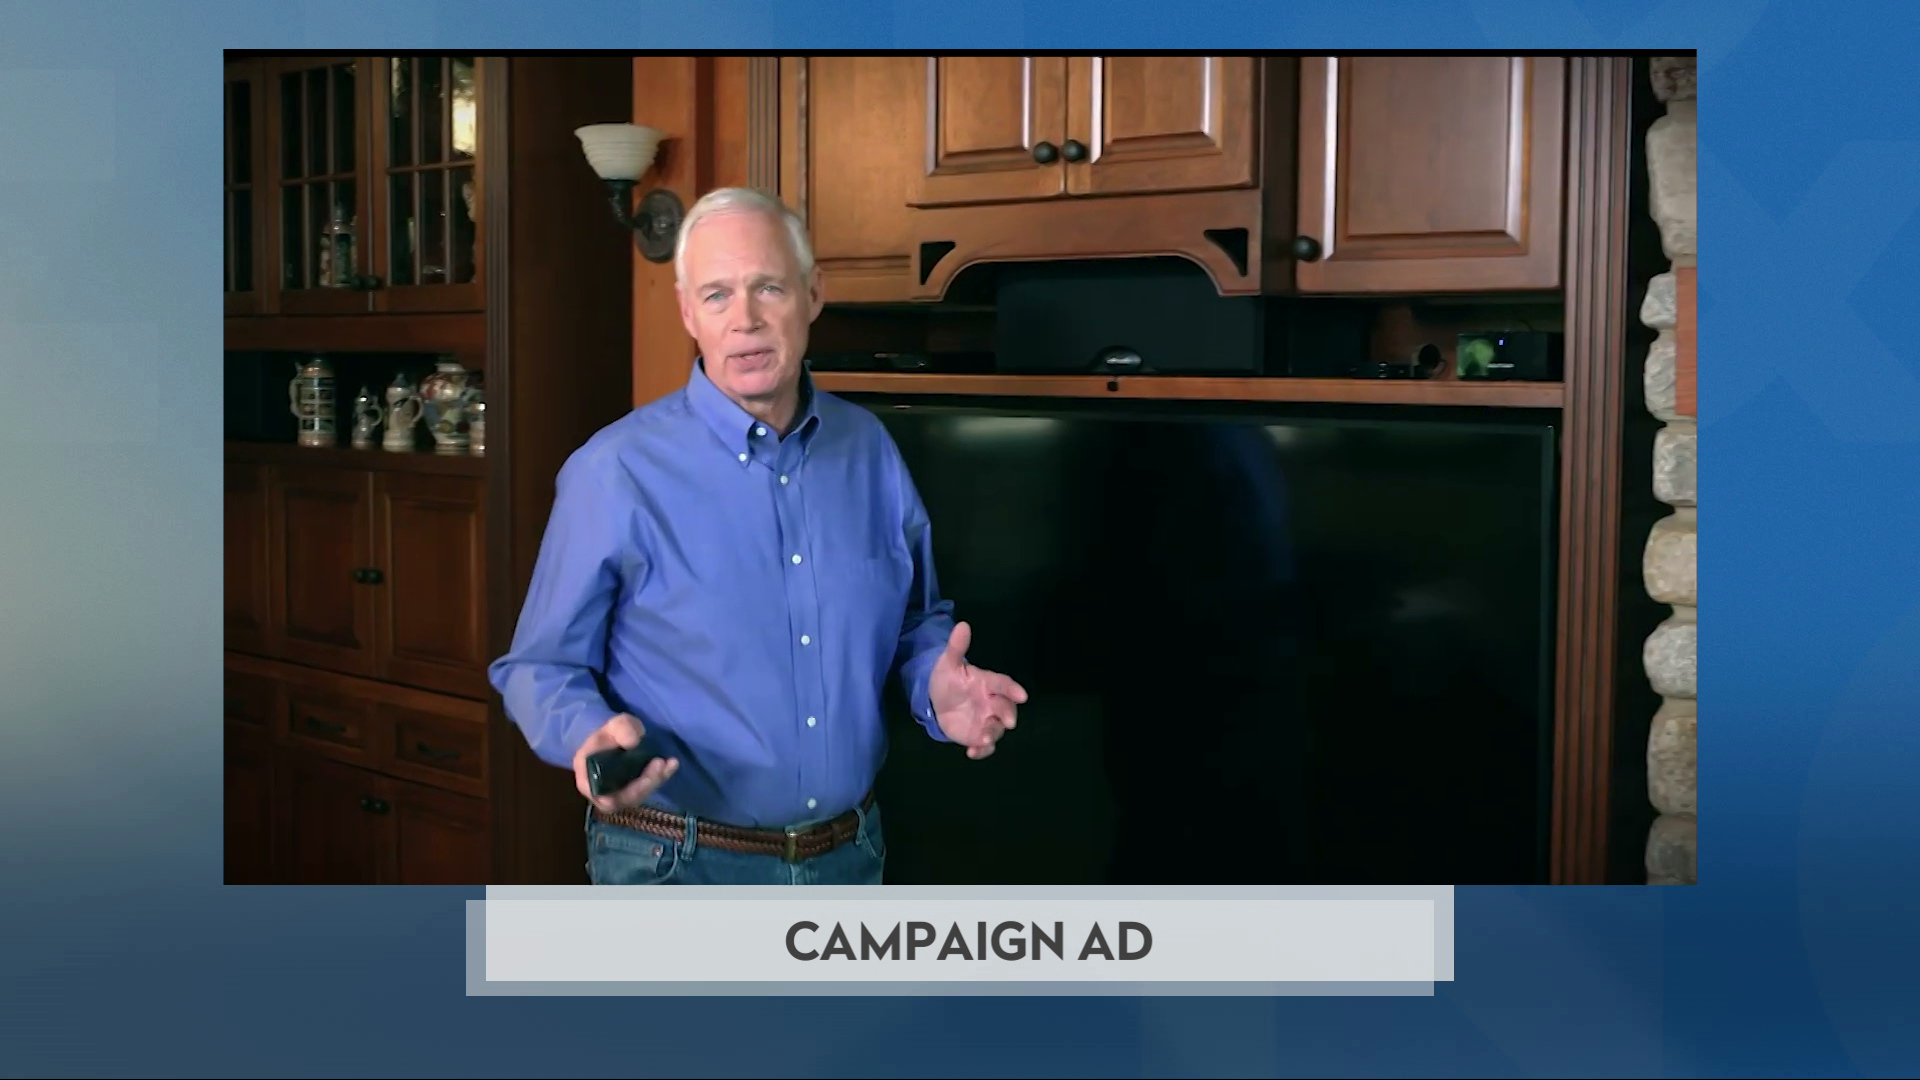 A still image from a political advertisement shows Ron Johnson standing and gesturing with his hands while standing in front of a large wood entertainment center with a television and speakers next to a tall cabinet displaying beer steins.